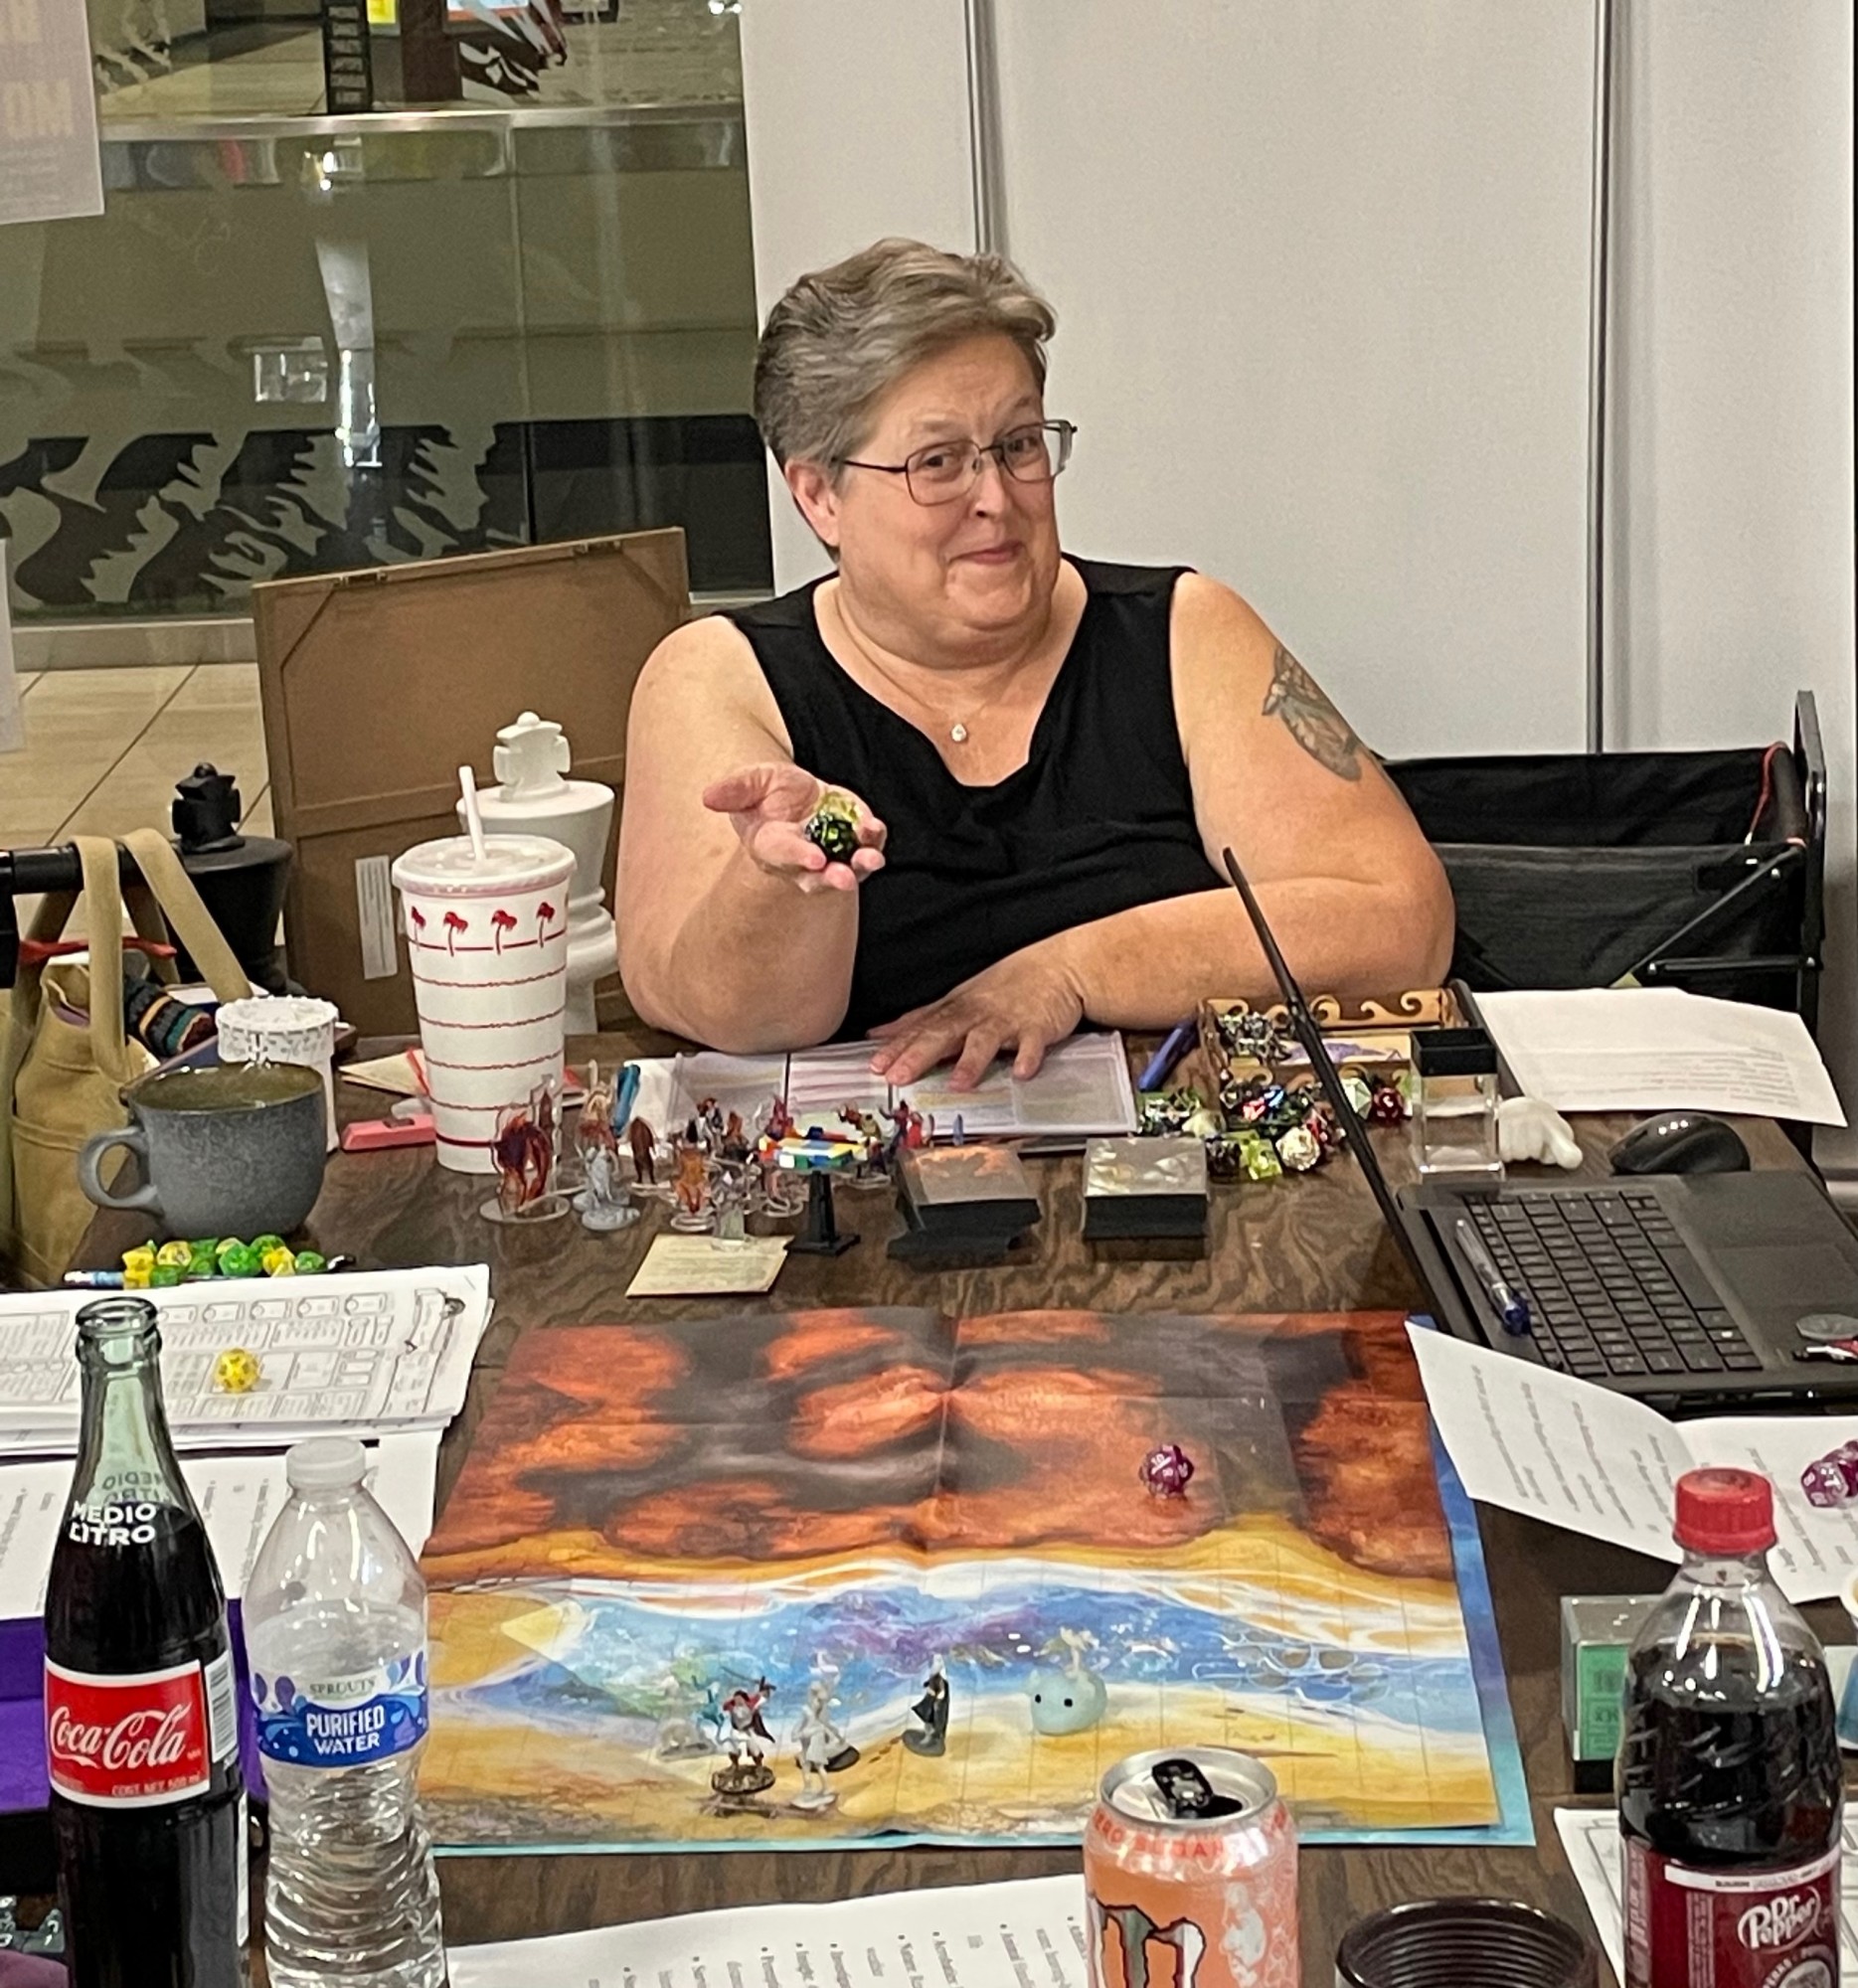 Dana Busenbark rolling her dice to advance the quest while playing Dungeons & Dragons on March 18, 2022. (Photo by Joseph Flores, El Inde Arizona)